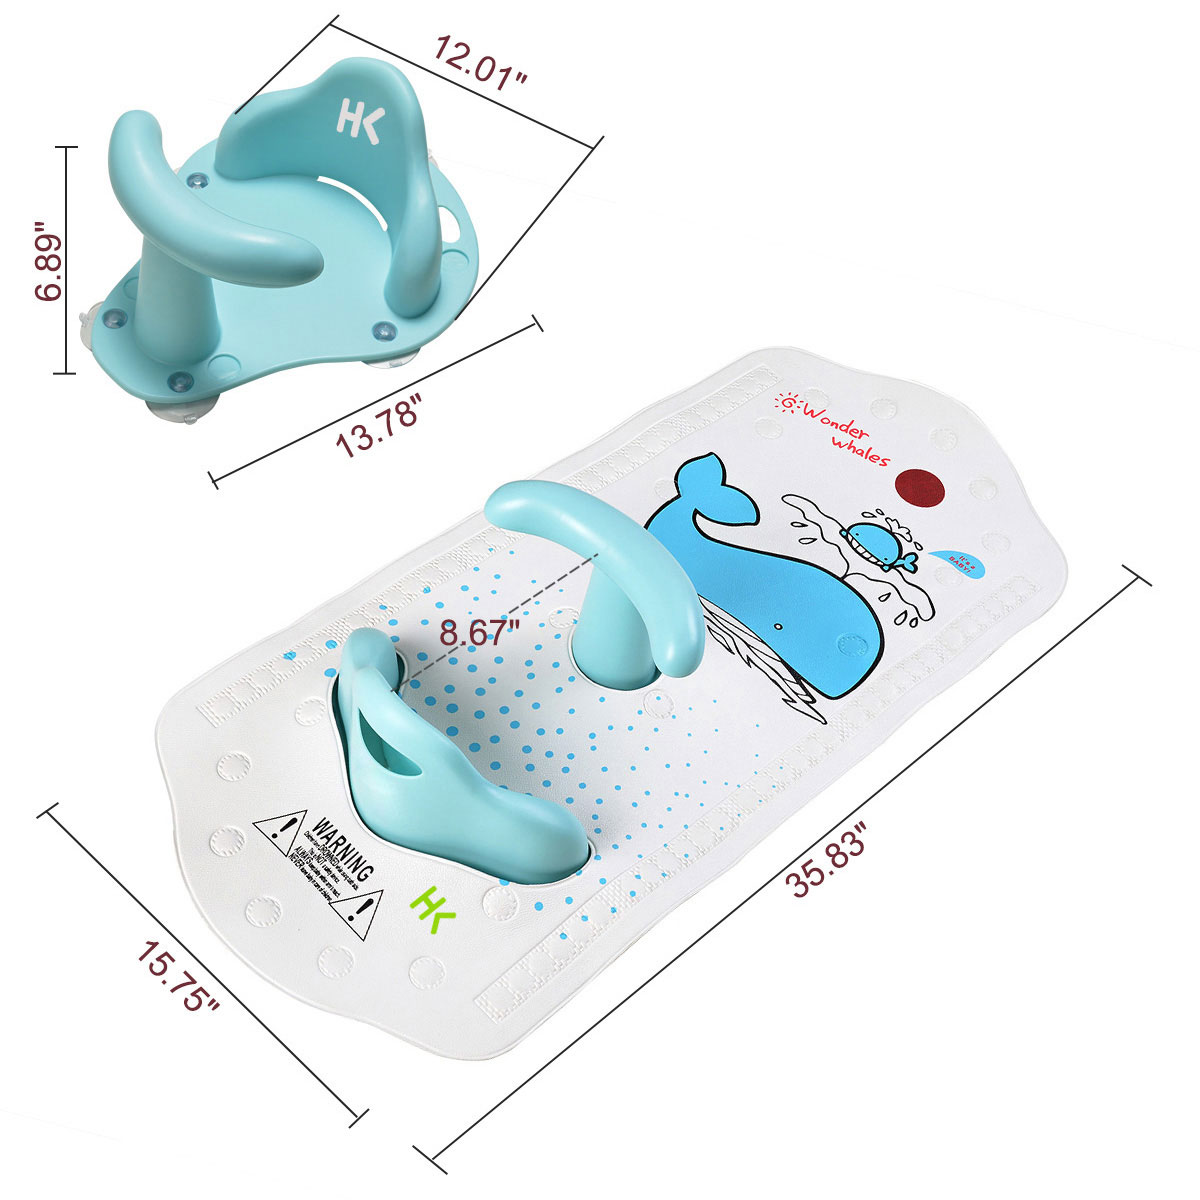 HK Infant Baby Safety Bath Support Seat Chair Sling Bather Mat for Tub Non-slip Heat Sensitive Mat (Blue)